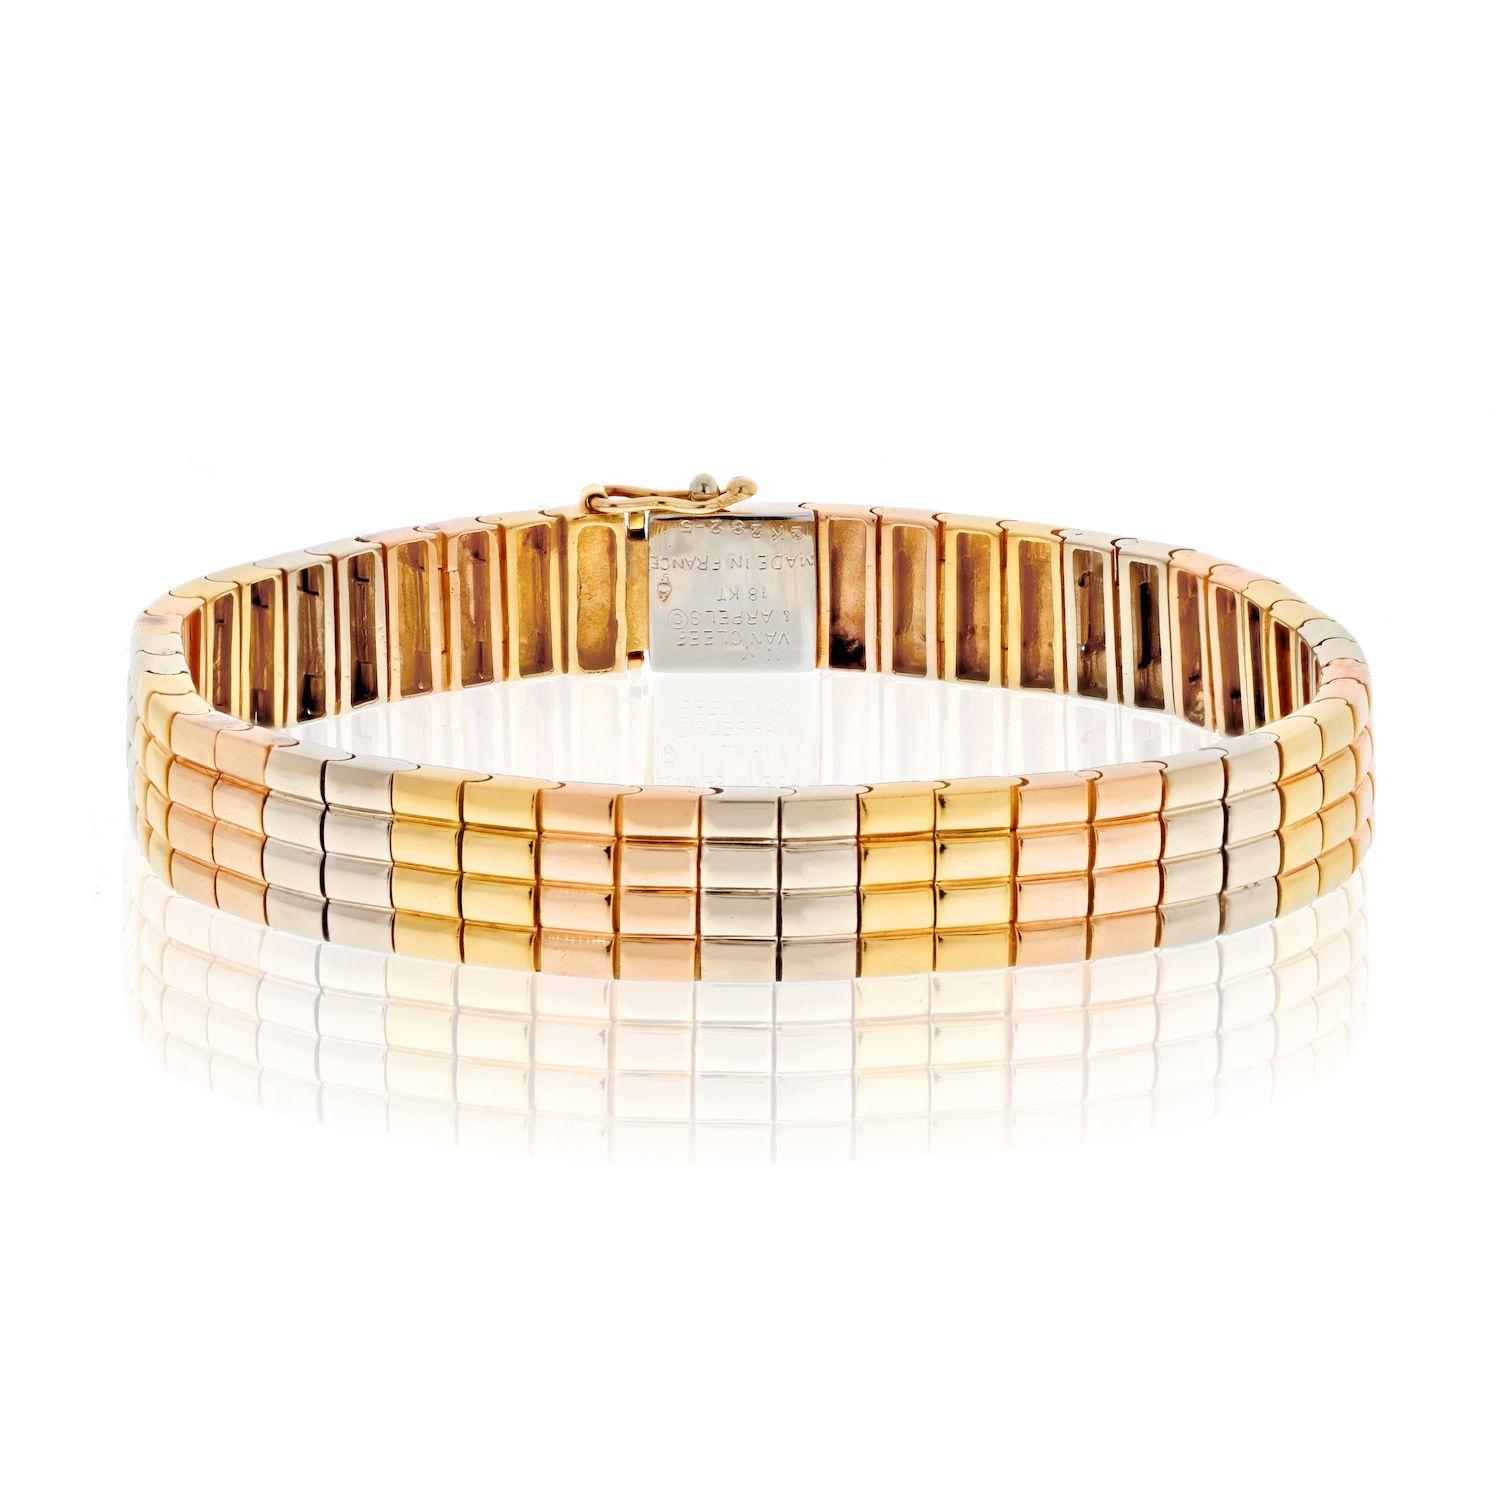 The vintage Van Cleef & Arpels Tri-Color Flat High Polish Bracelet is a true testament to the brand's exquisite craftsmanship and iconic design. This bracelet is a beautiful representation of Van Cleef & Arpels' signature tri-color gold technique,